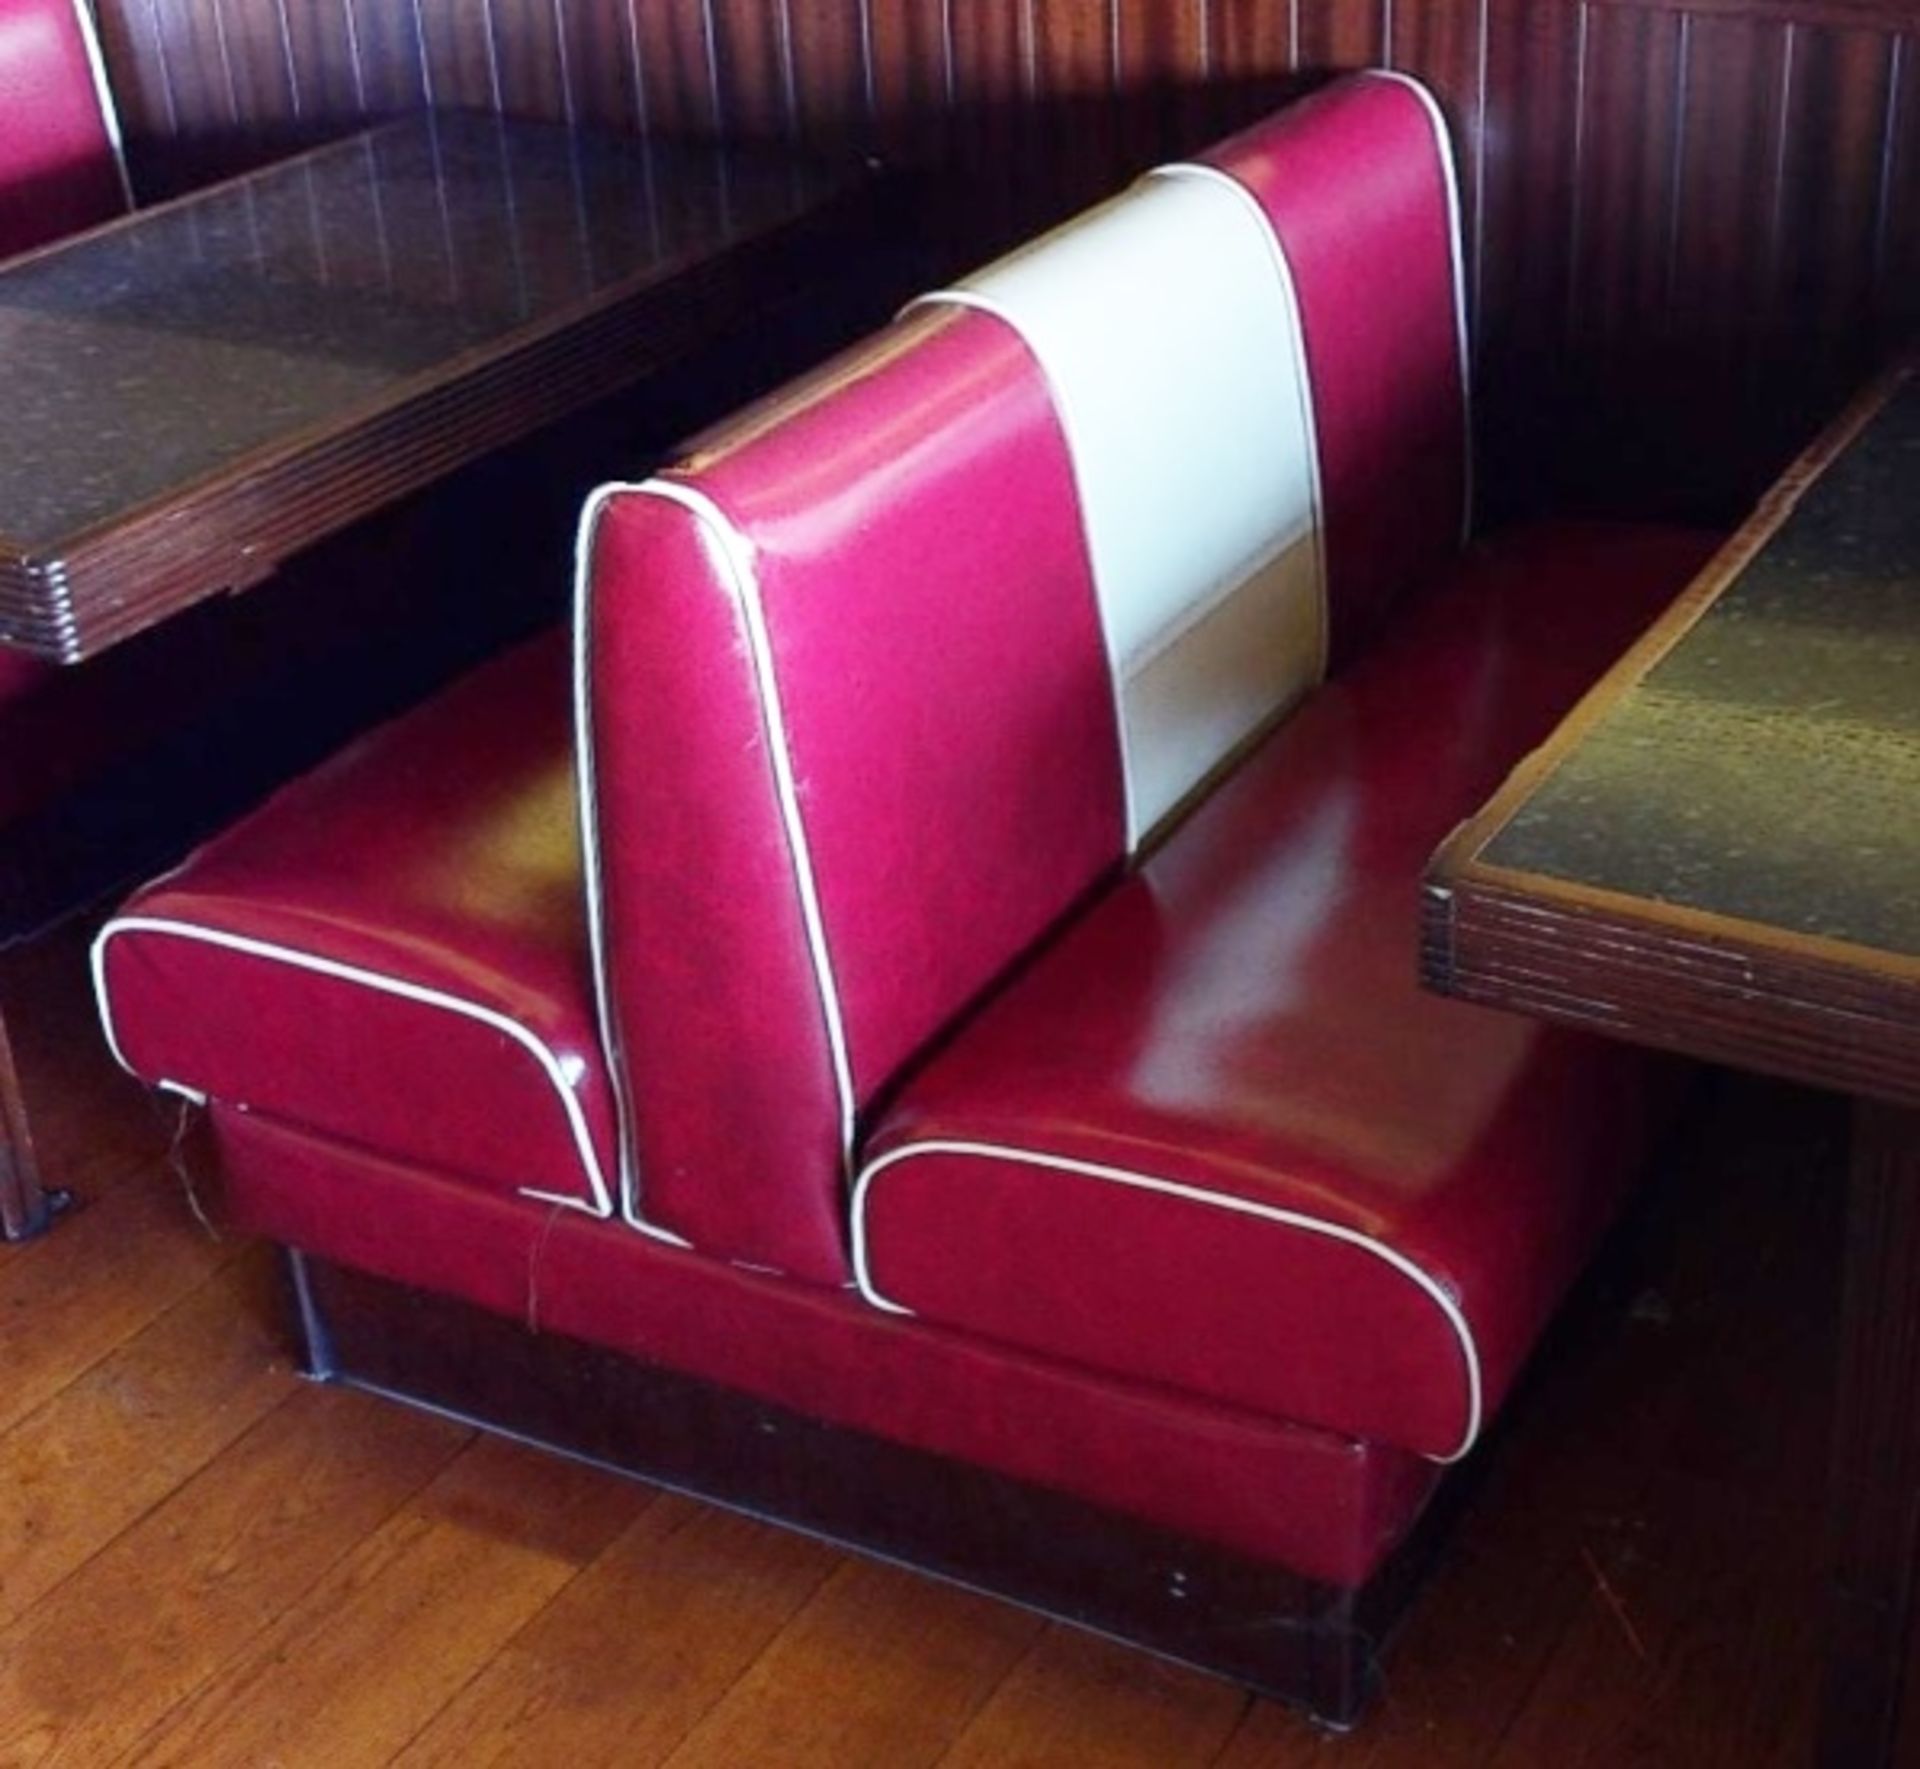 1 x Assorted Lot of Restaurant Seating Benches - Seats 18 Persons - American Diner Style in Red - Image 10 of 11